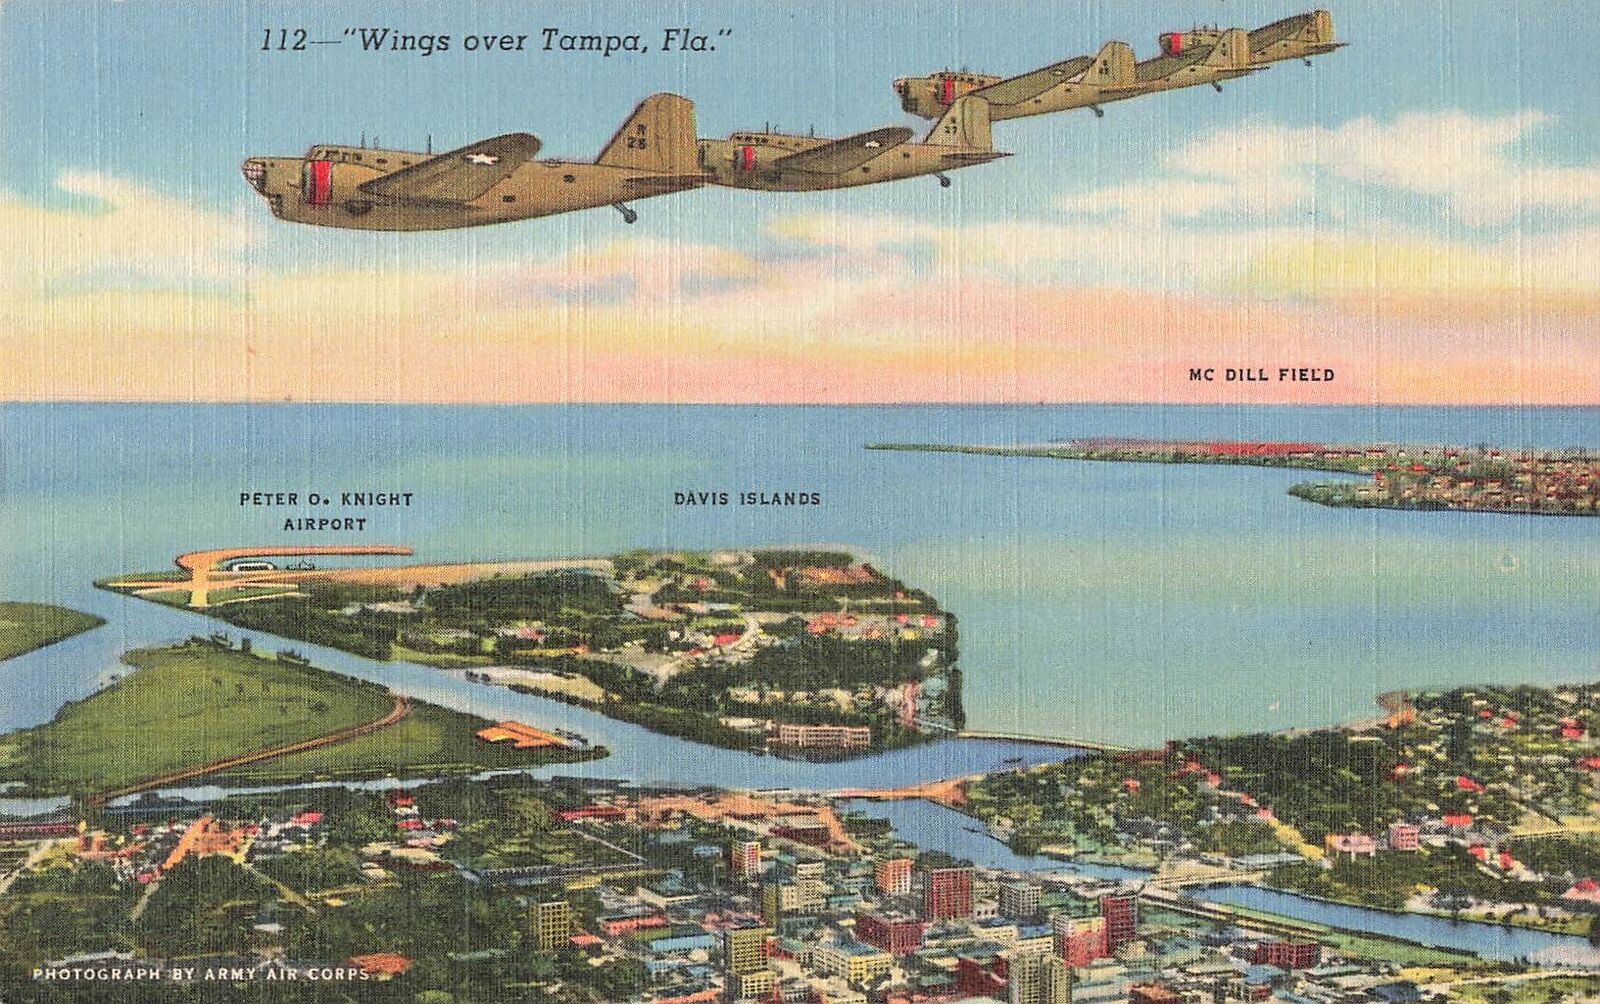 Vintage Postcard Wings over Tampa, Fla, Peter O. Knight Airport, McDill Fld WW2